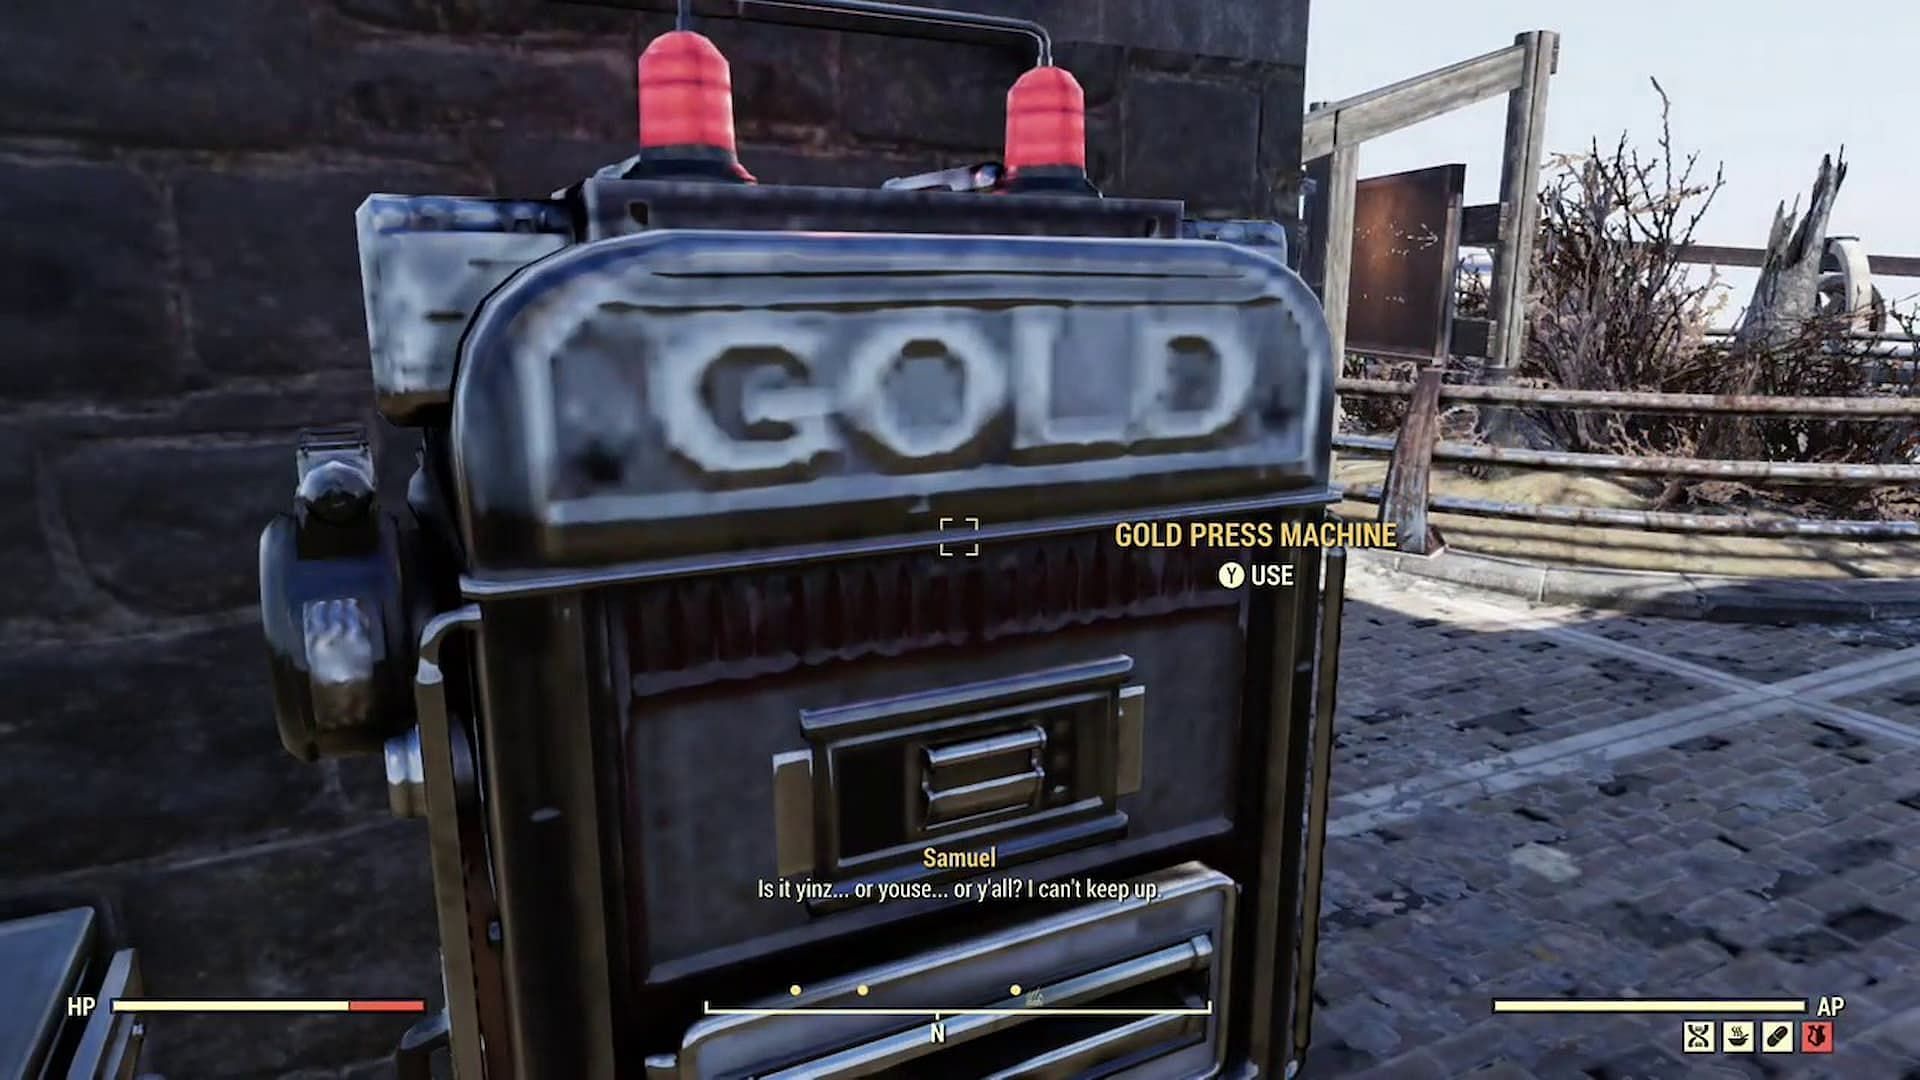 Players can acquire the Gold bullion currency in Fallout 76 (Image via Bethesda Game Studios)